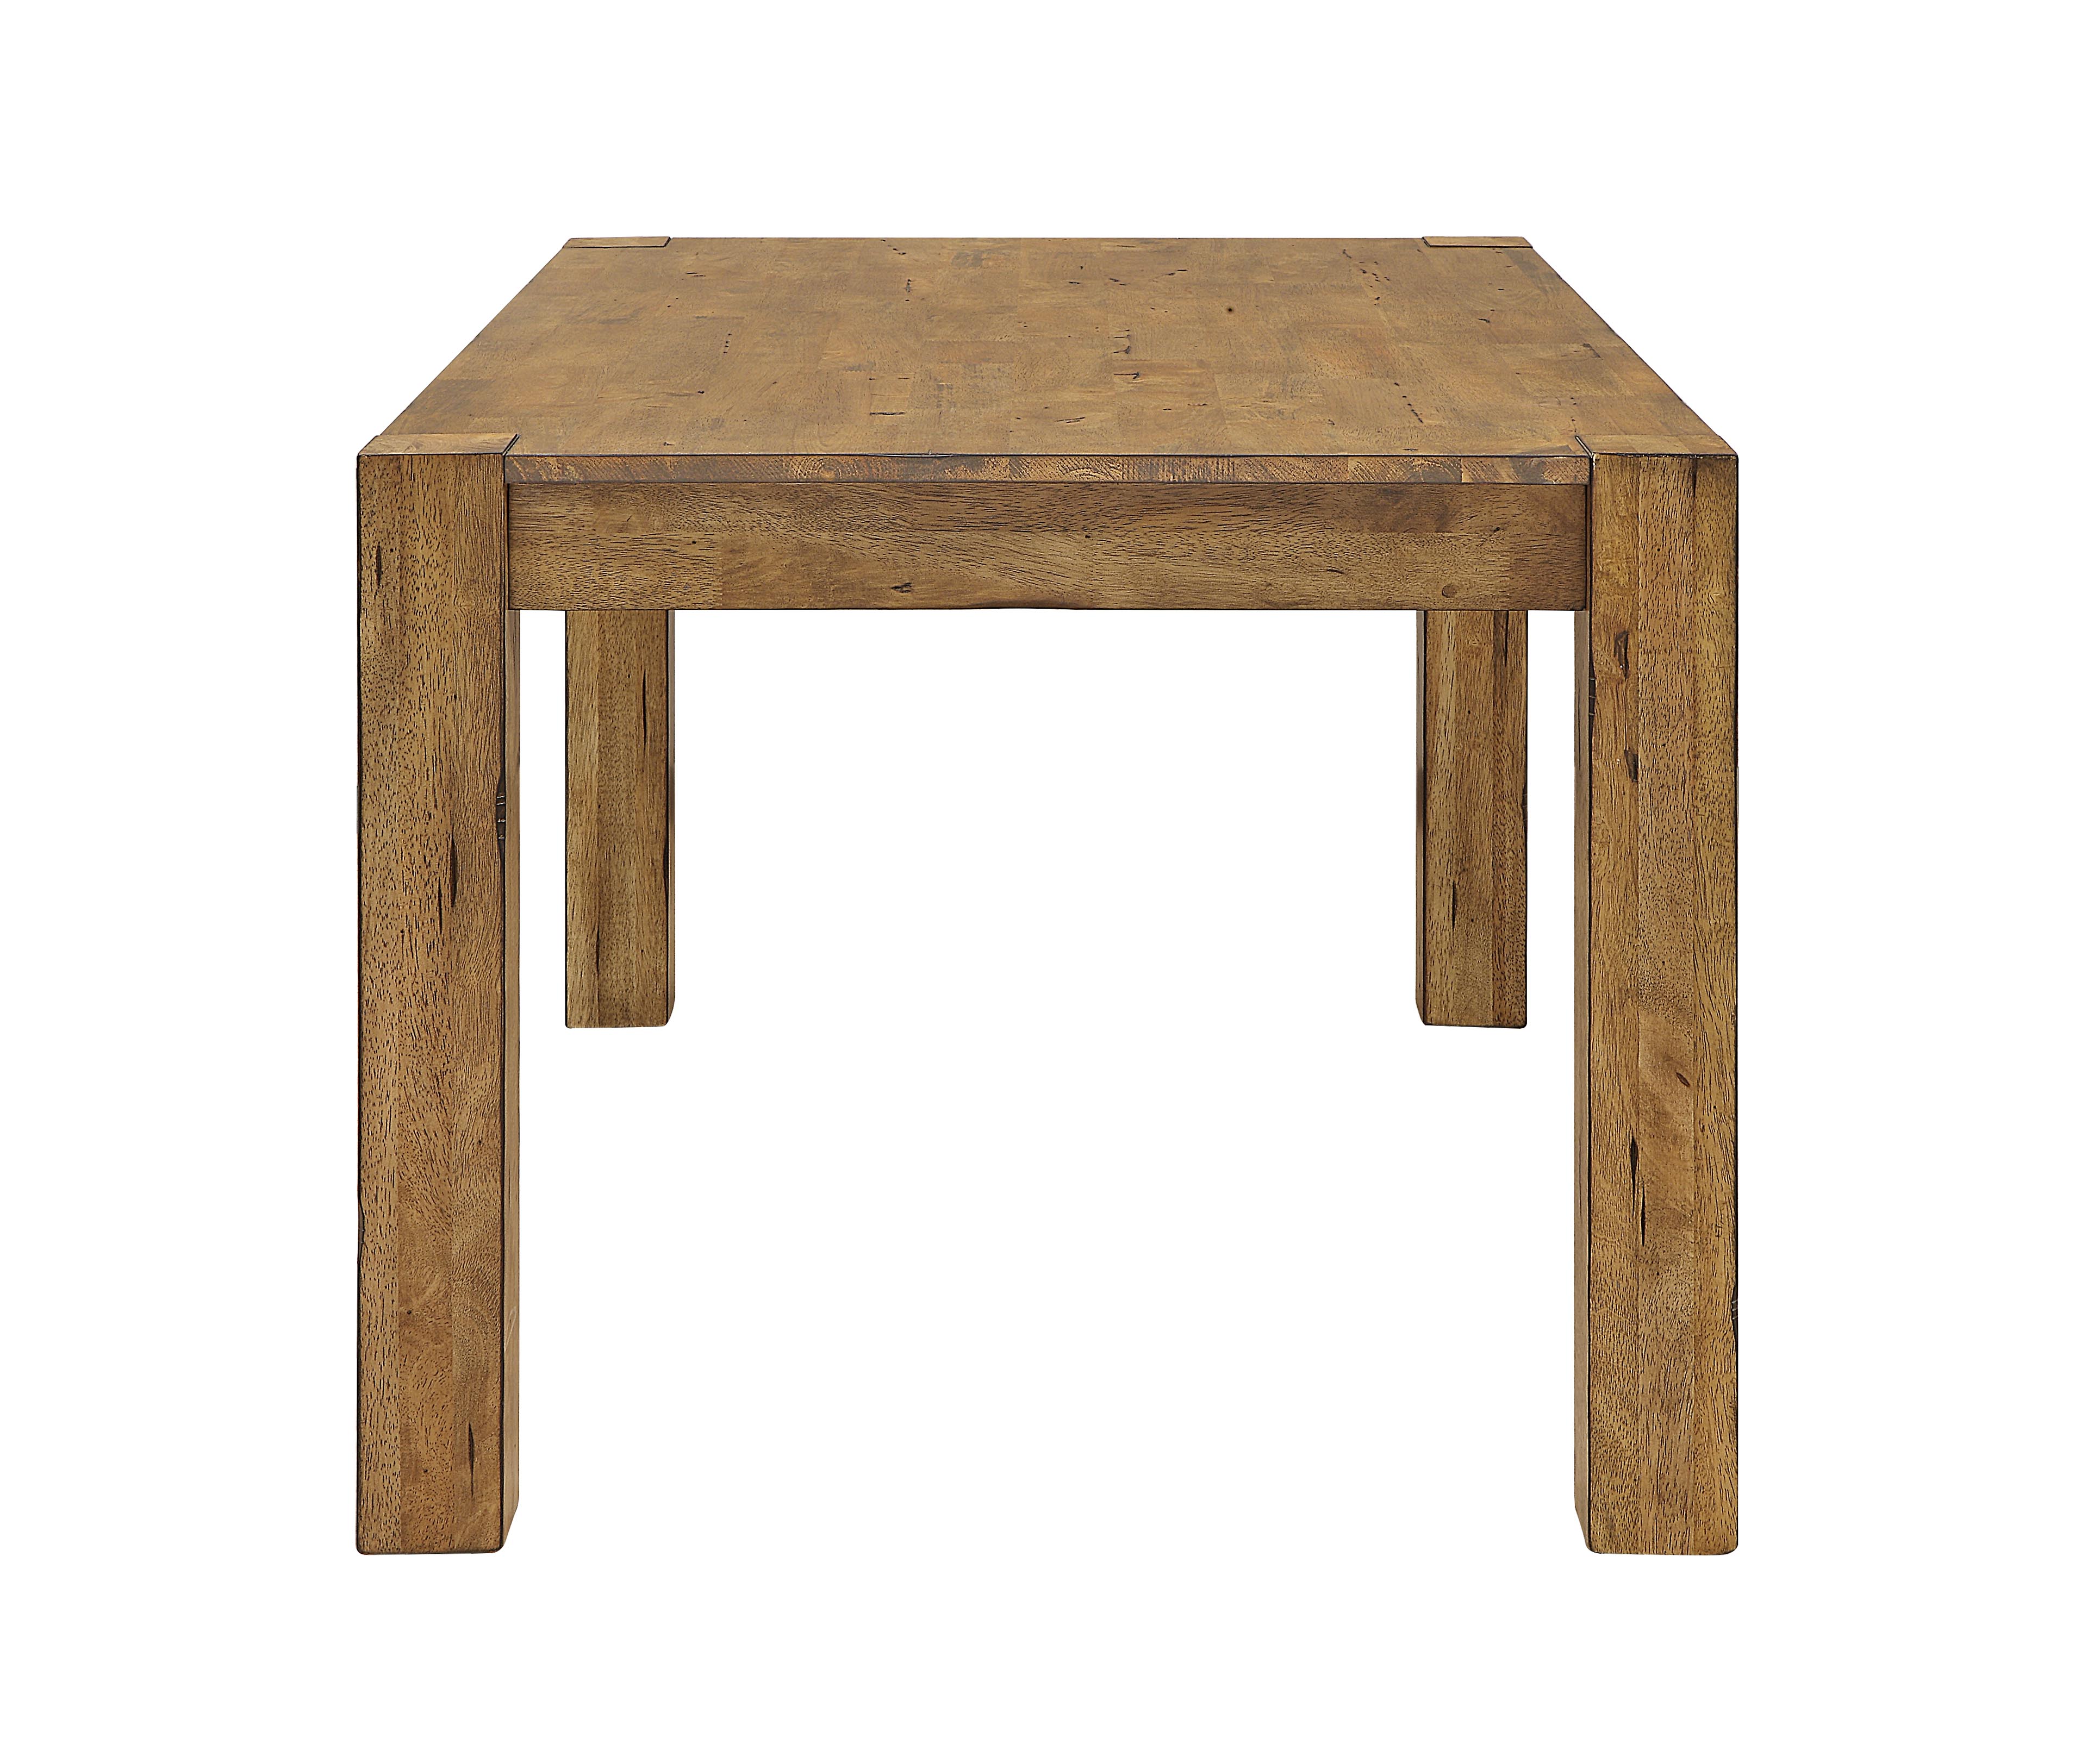 Better Homes & Gardens Bryant Solid Wood Dining Table, Rustic Brown - image 5 of 14